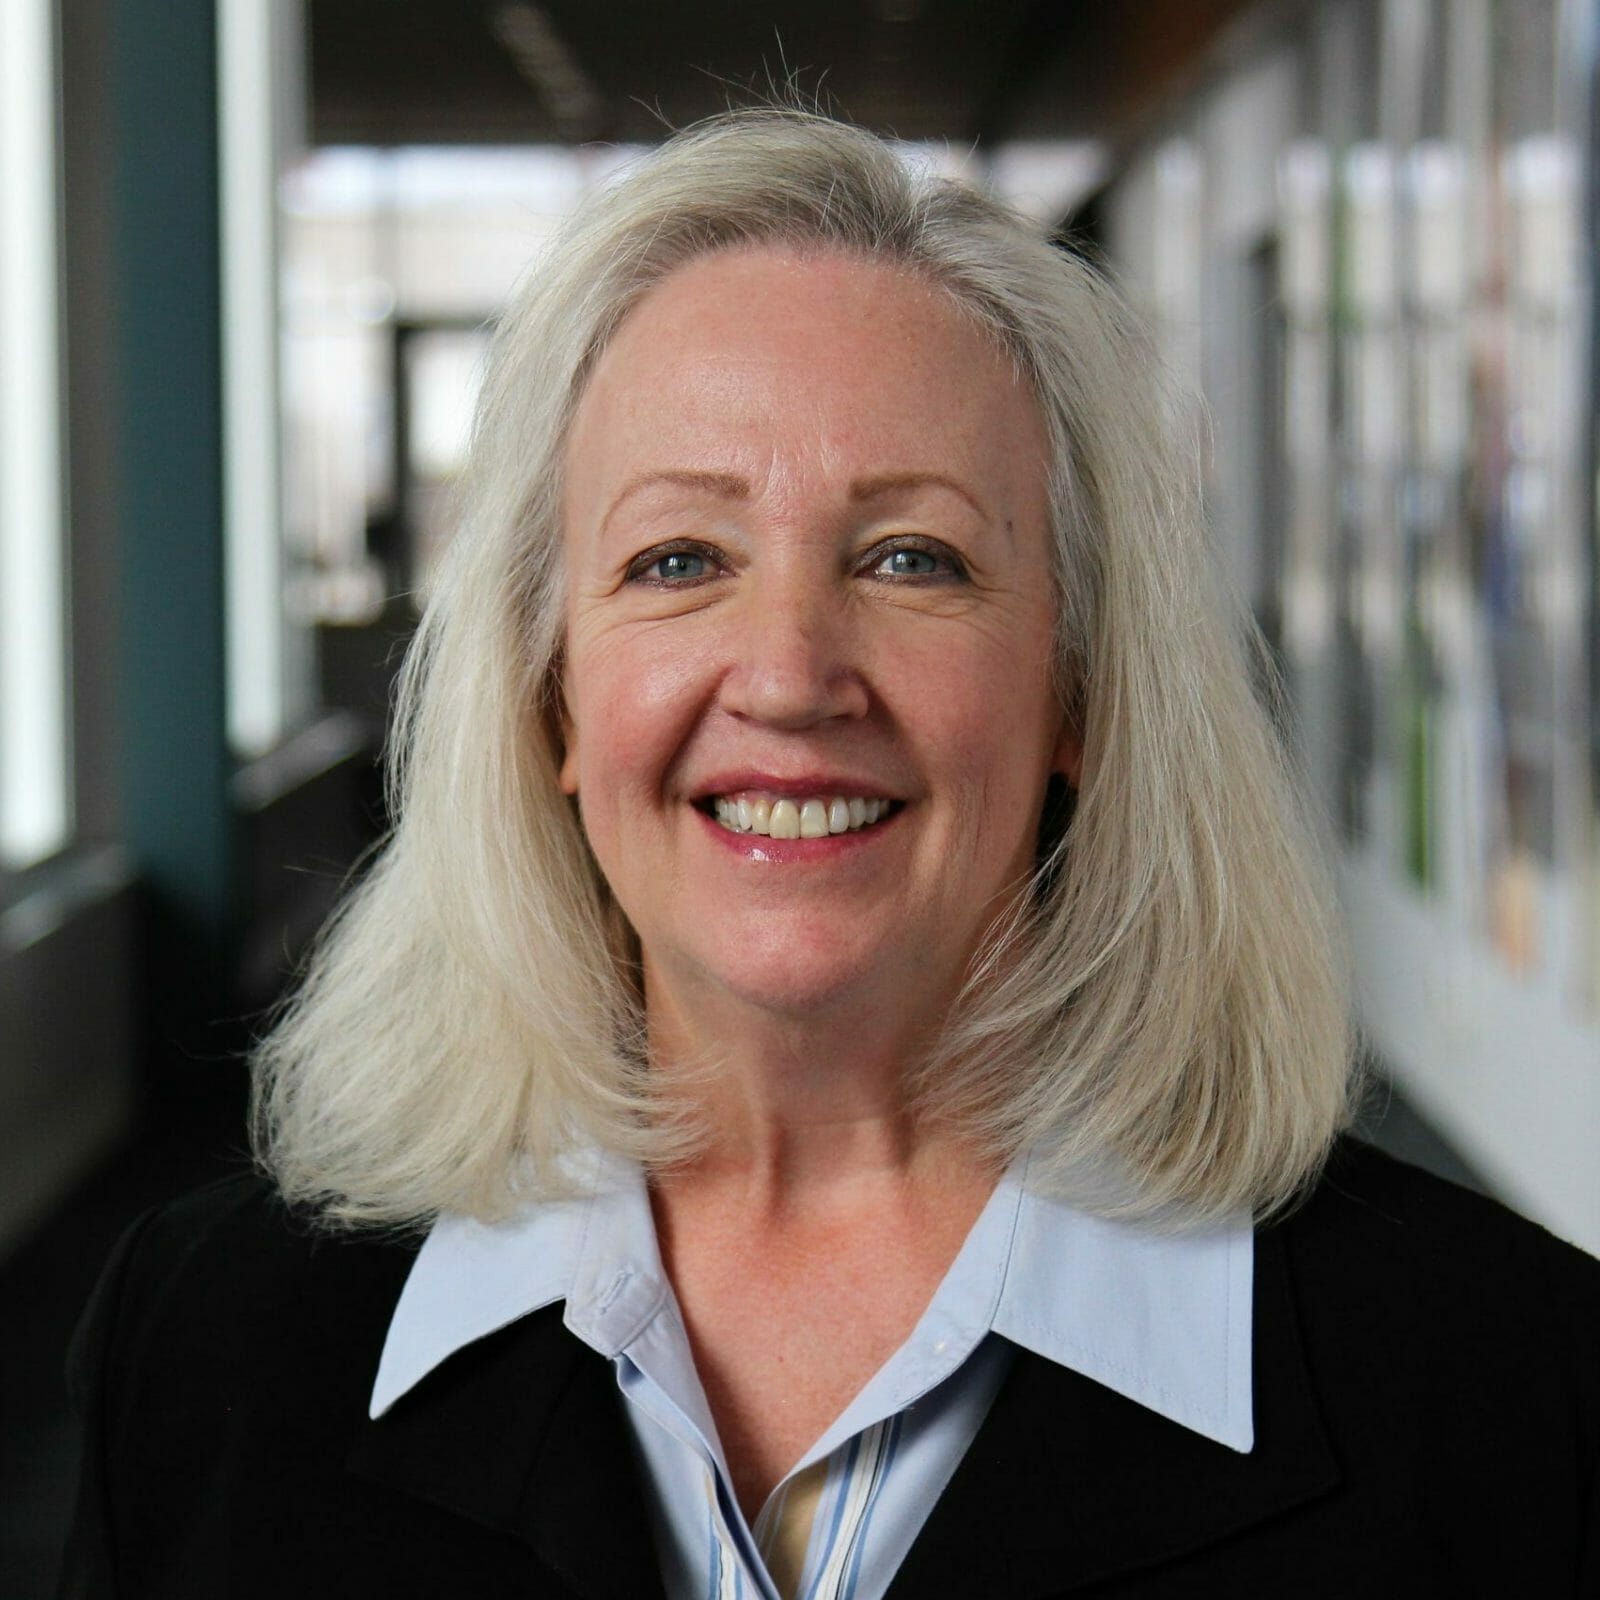 Kathy Selden wearing a black jacket and smiling